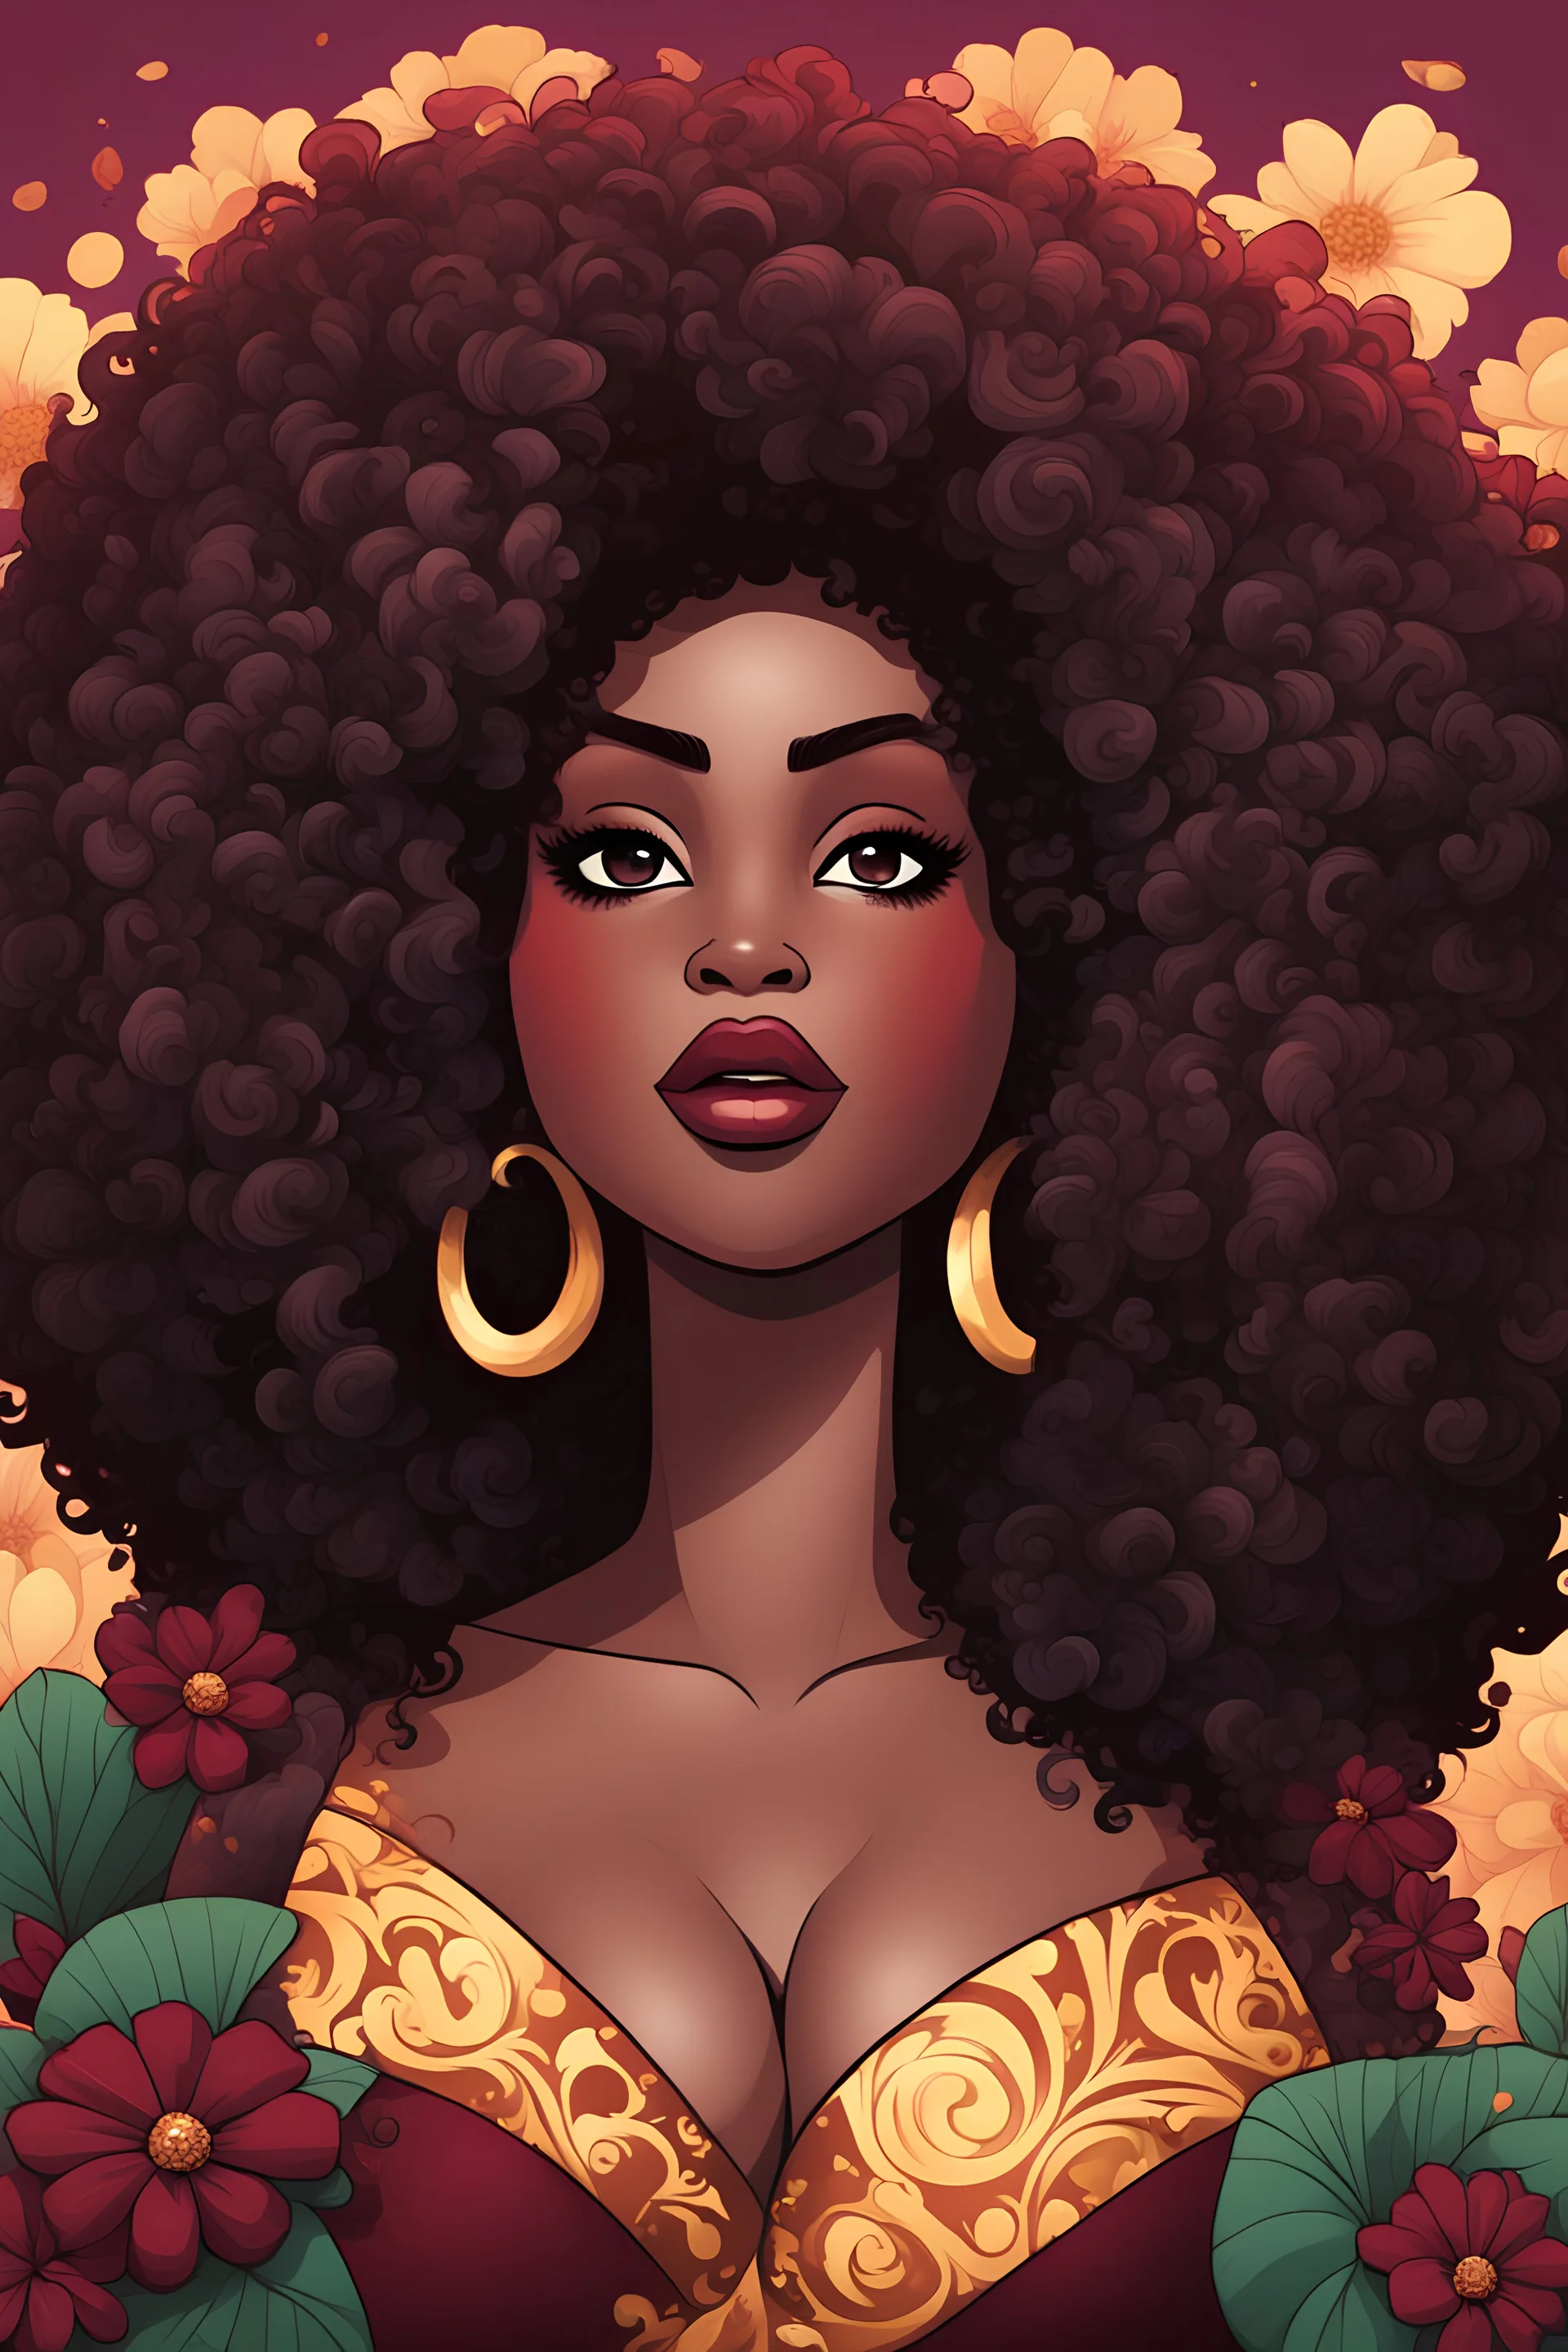 create a magna cartoon style image with exaggerated features, 2k. cartoon image of a plus size black female looking off to the side with a large thick tightly curly asymmetrical afro. Very beautiful. With Garnet, black flowers